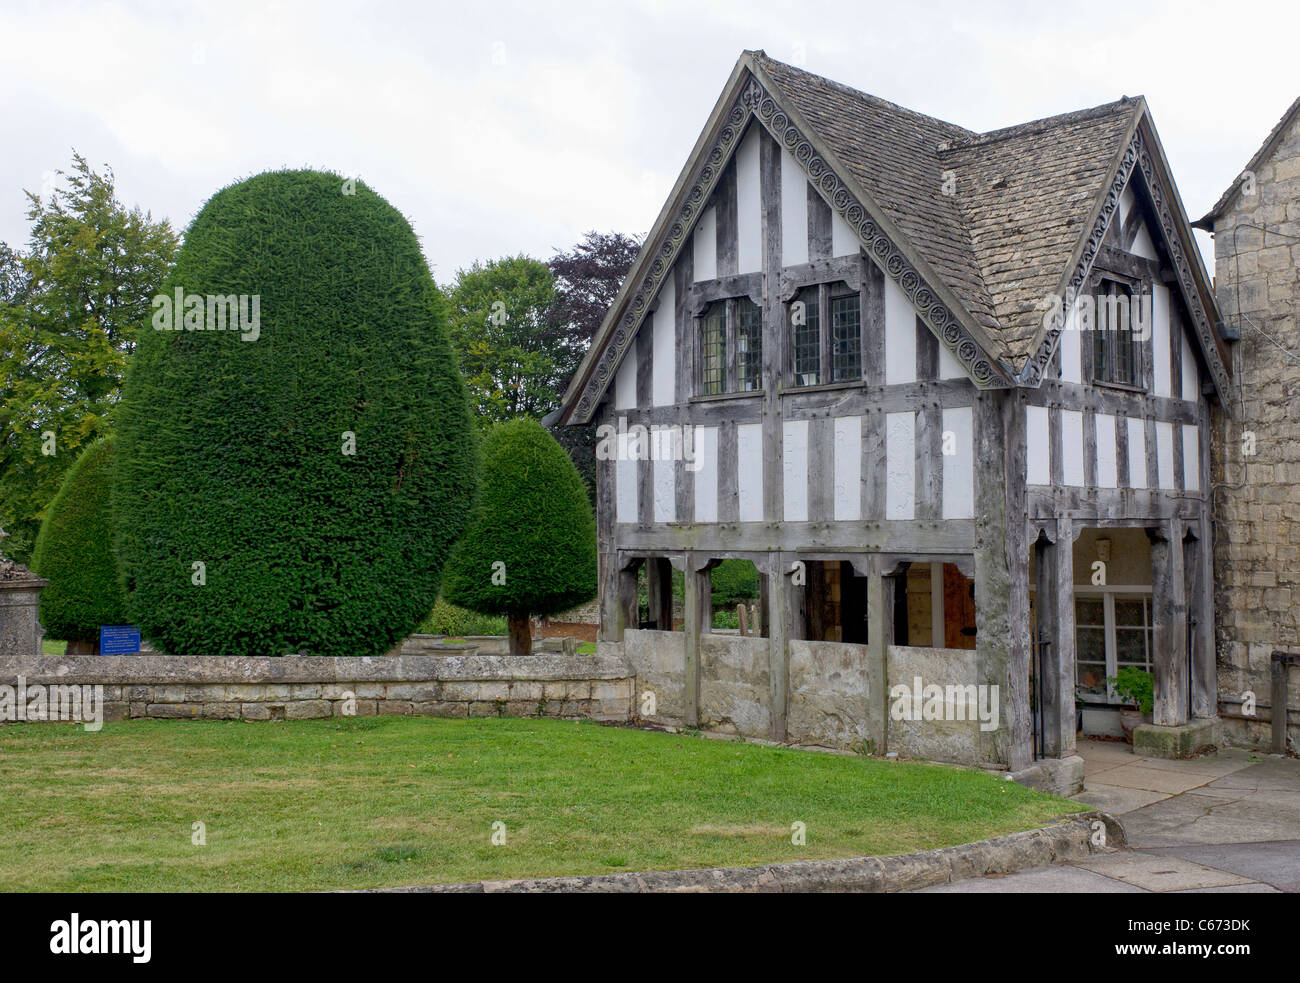 Old half-timbered building in the grounds of St Mary's Parish Church in the Cotswolds village of Painswick, Gloucestershire Stock Photo